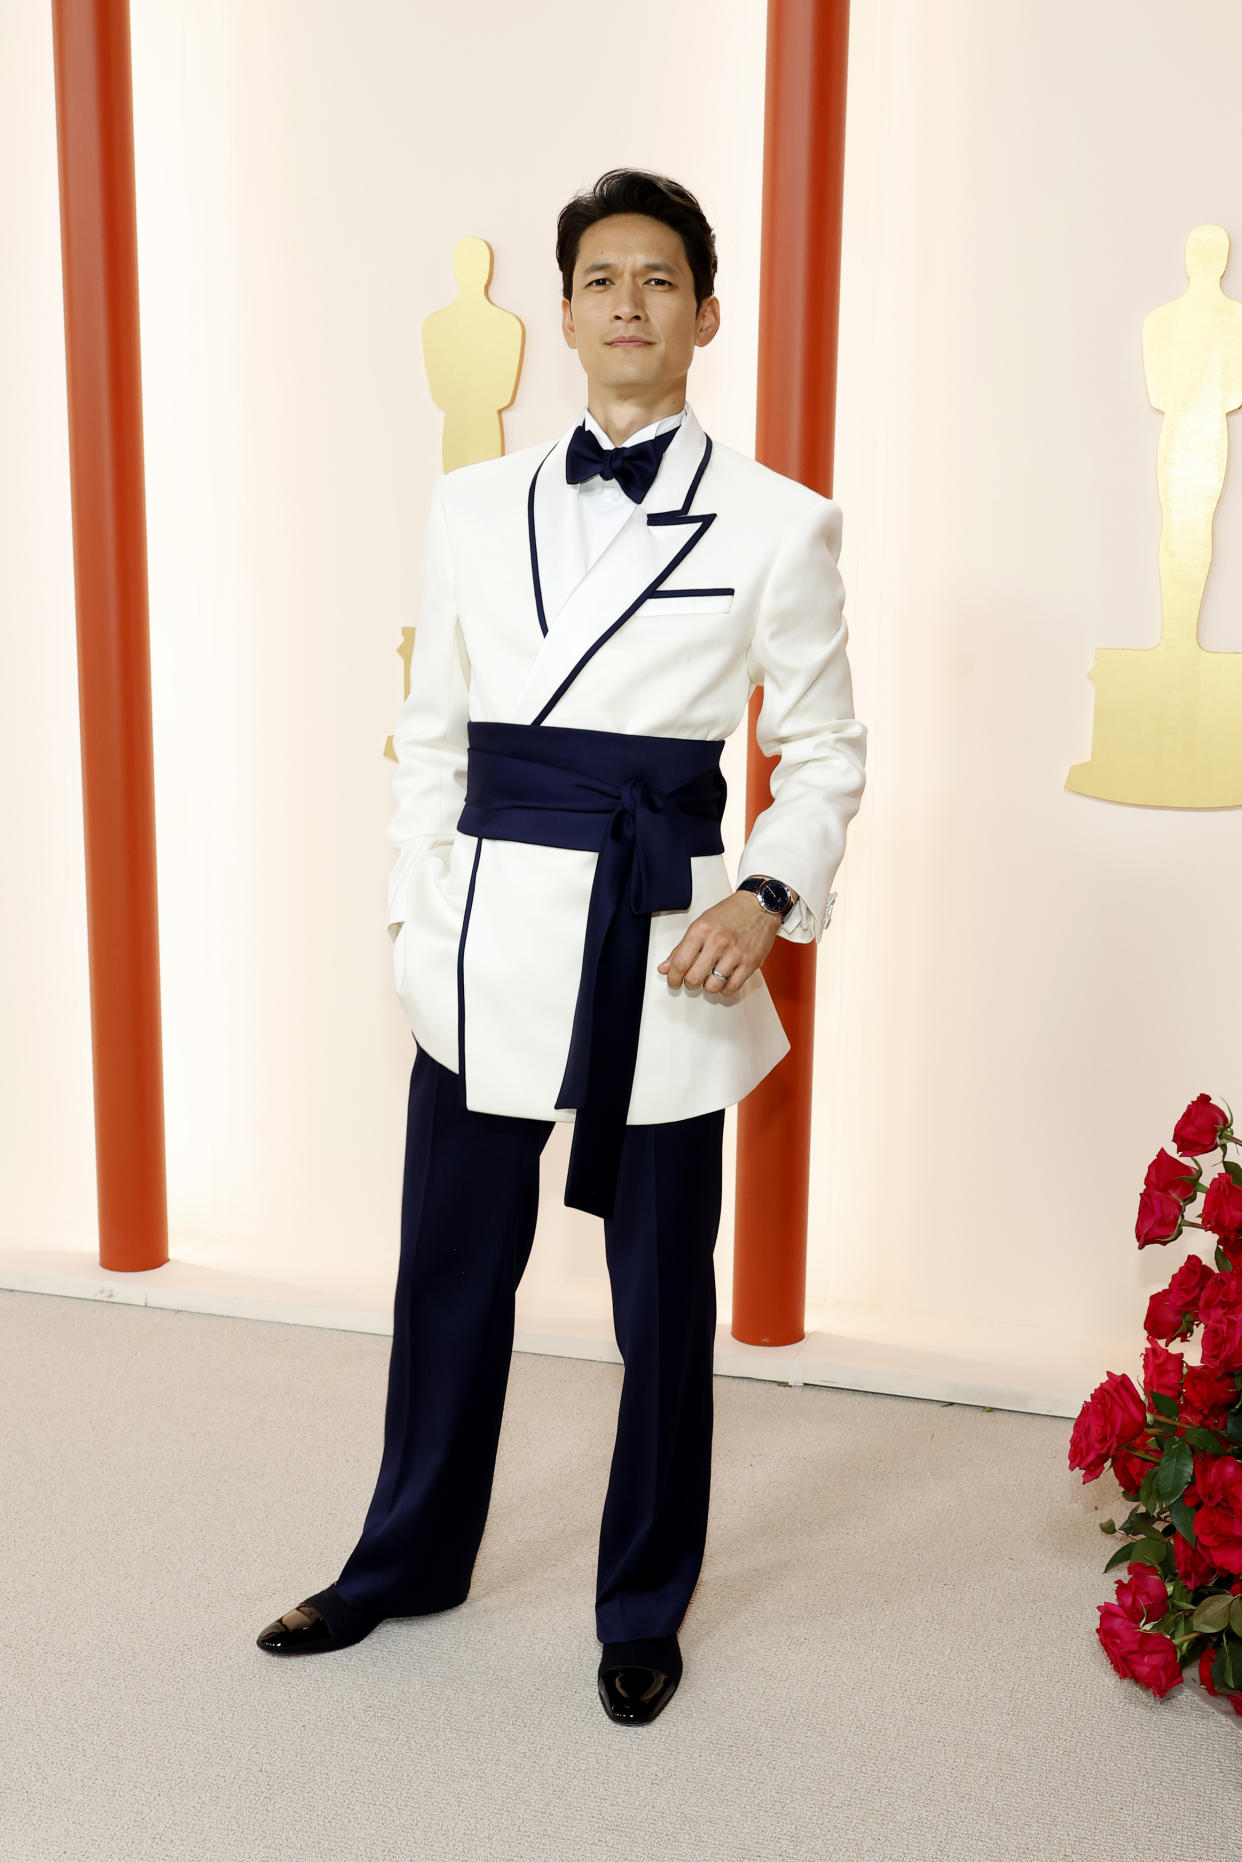 HOLLYWOOD, CALIFORNIA - MARCH 12: Harry Shum Jr. attends the 95th Annual Academy Awards on March 12, 2023 in Hollywood, California. (Photo by Mike Coppola/Getty Images)